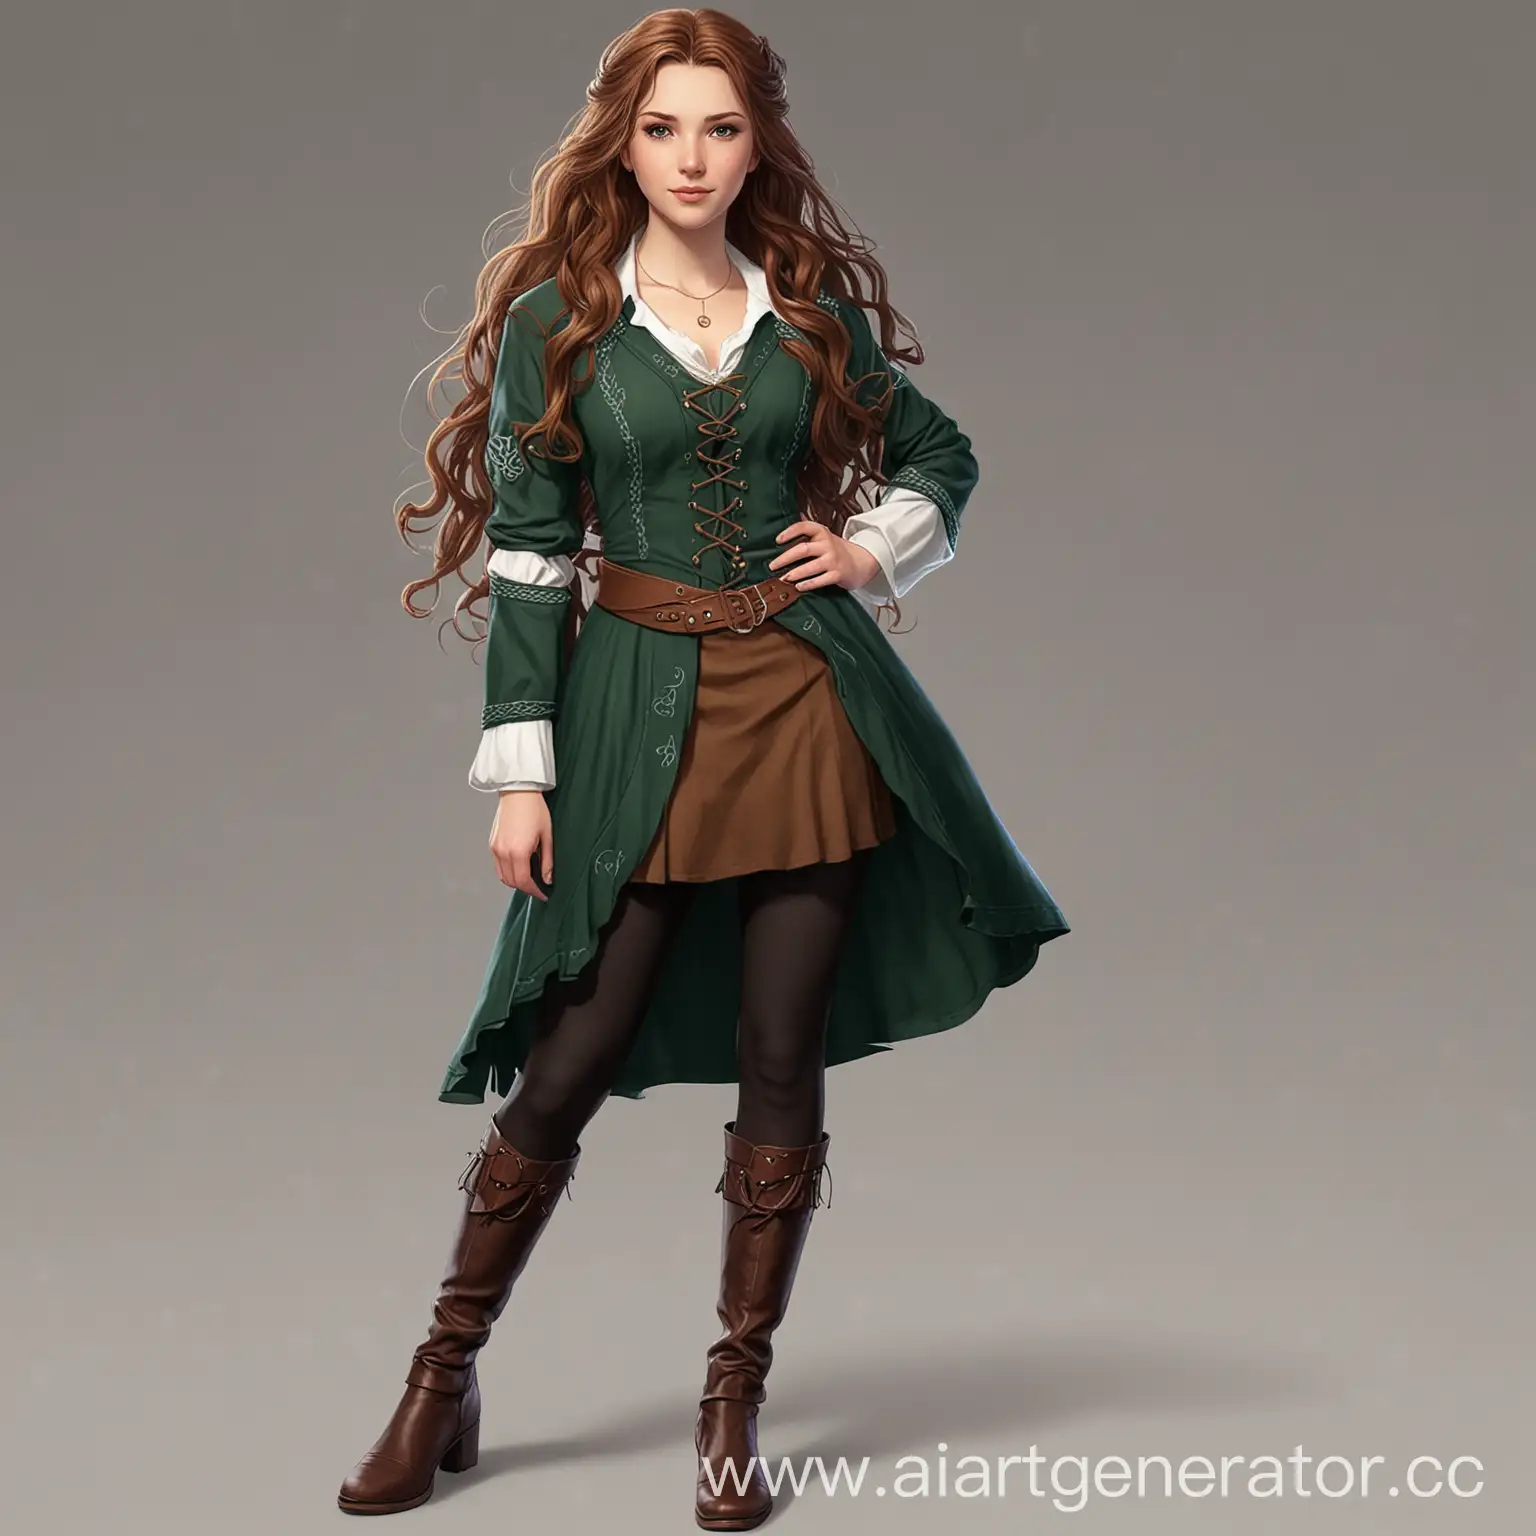 Celtic-Woman-Character-with-Brown-Wavy-Hair-in-Enthusiastic-Pose